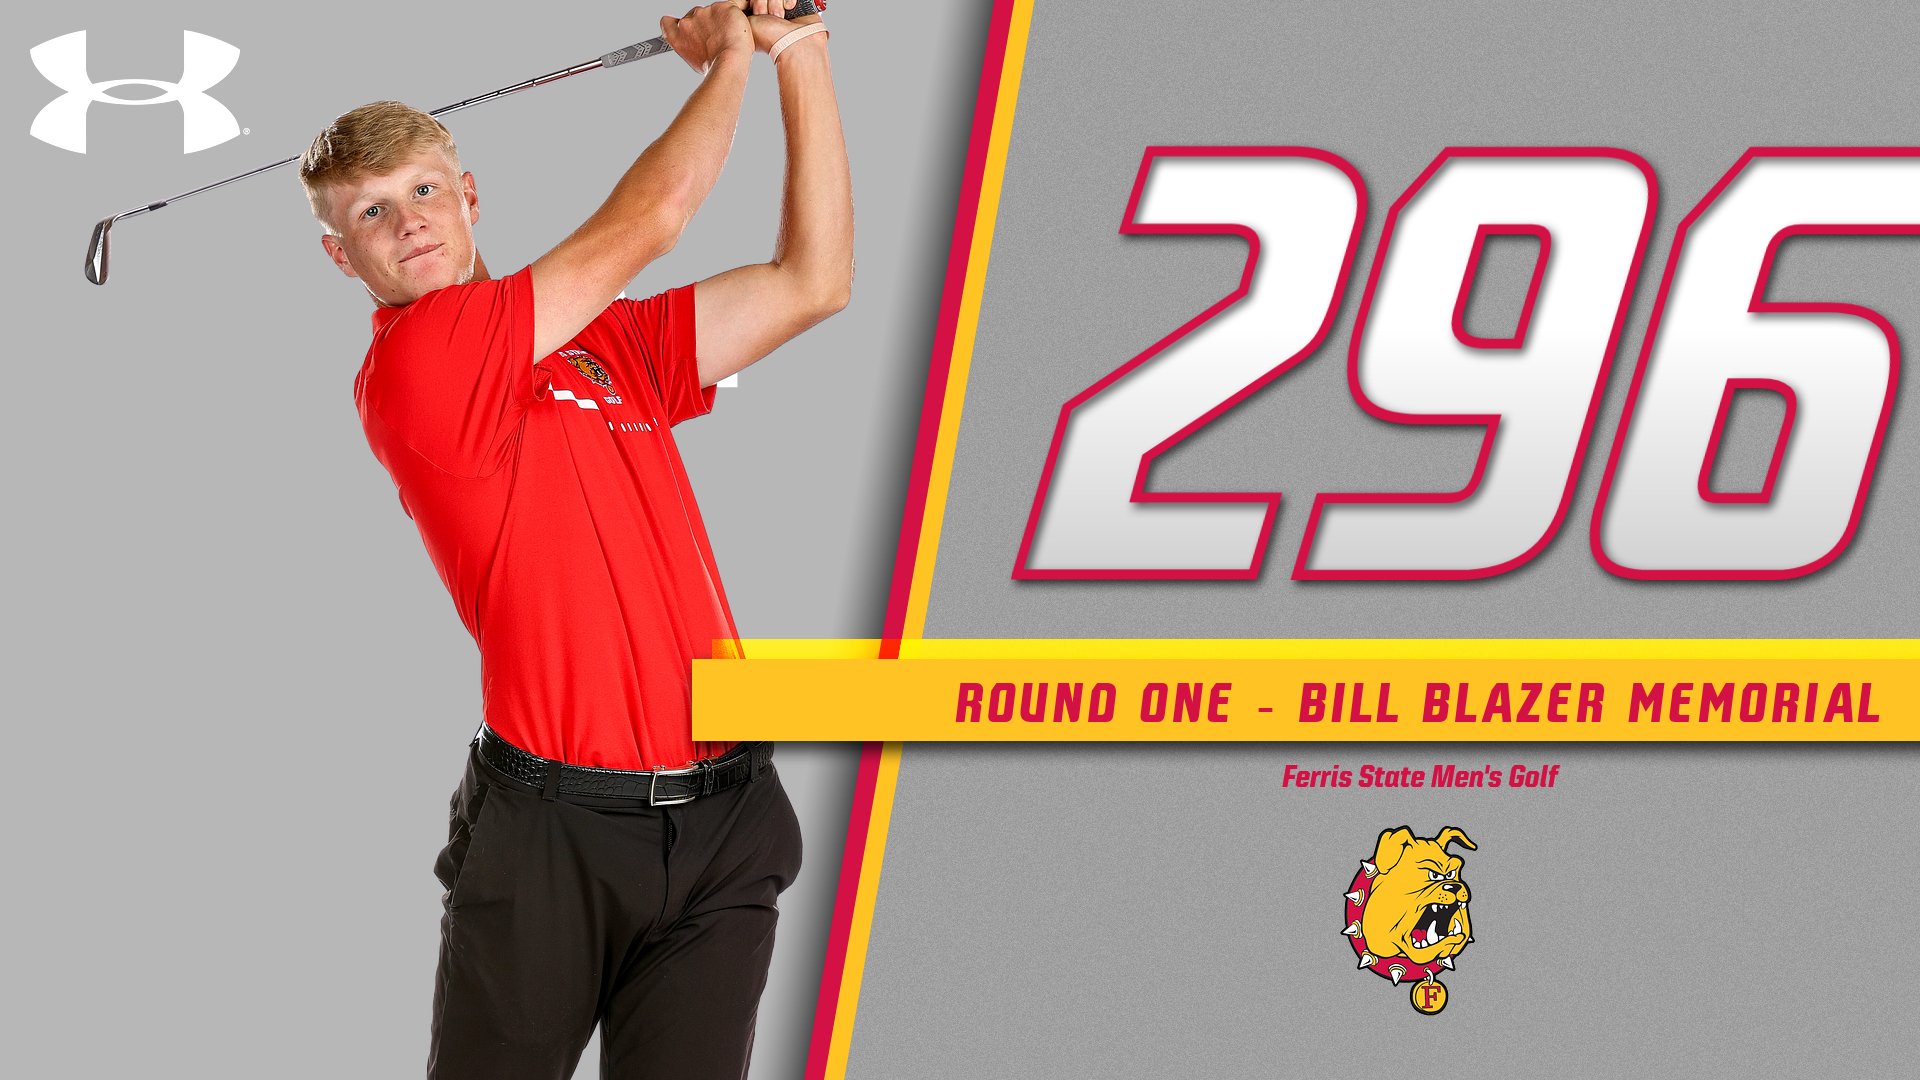 Ferris State Tied For Sixth After First Round At Bill Blazer Memorial